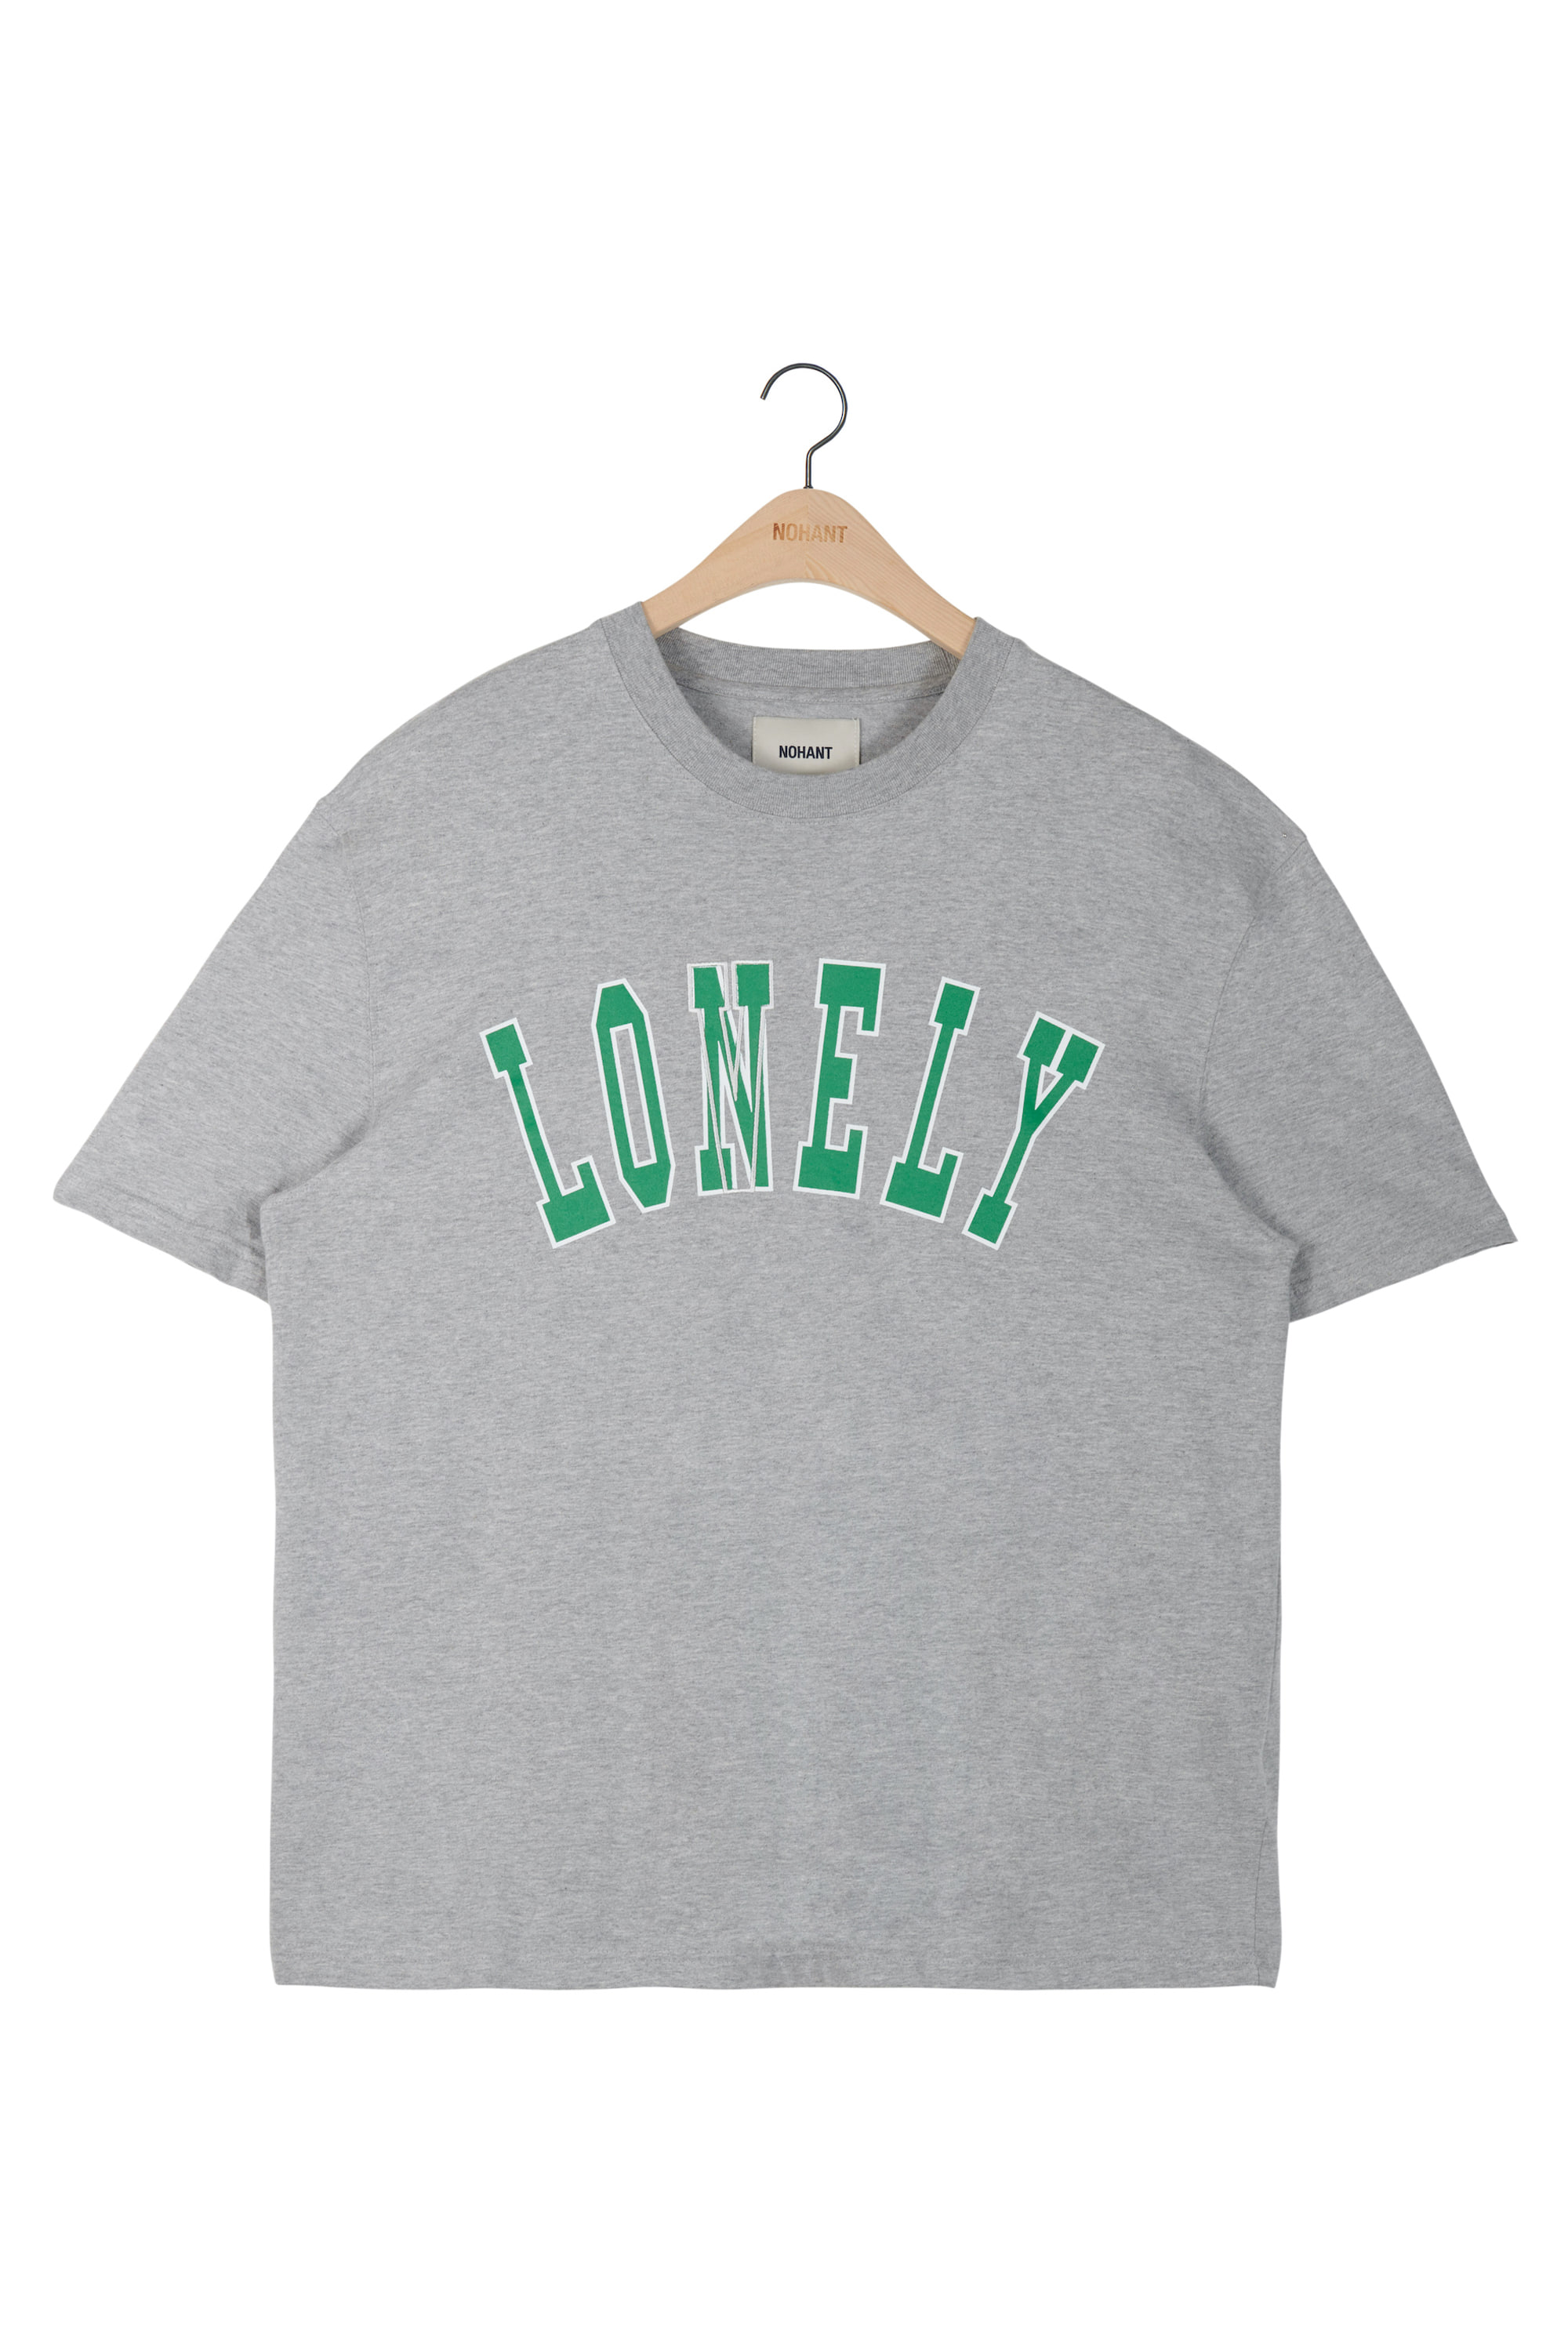 [CARRY OVER] LONELY/LOVELY SHORT SLEEVE T SHIRT GRAY